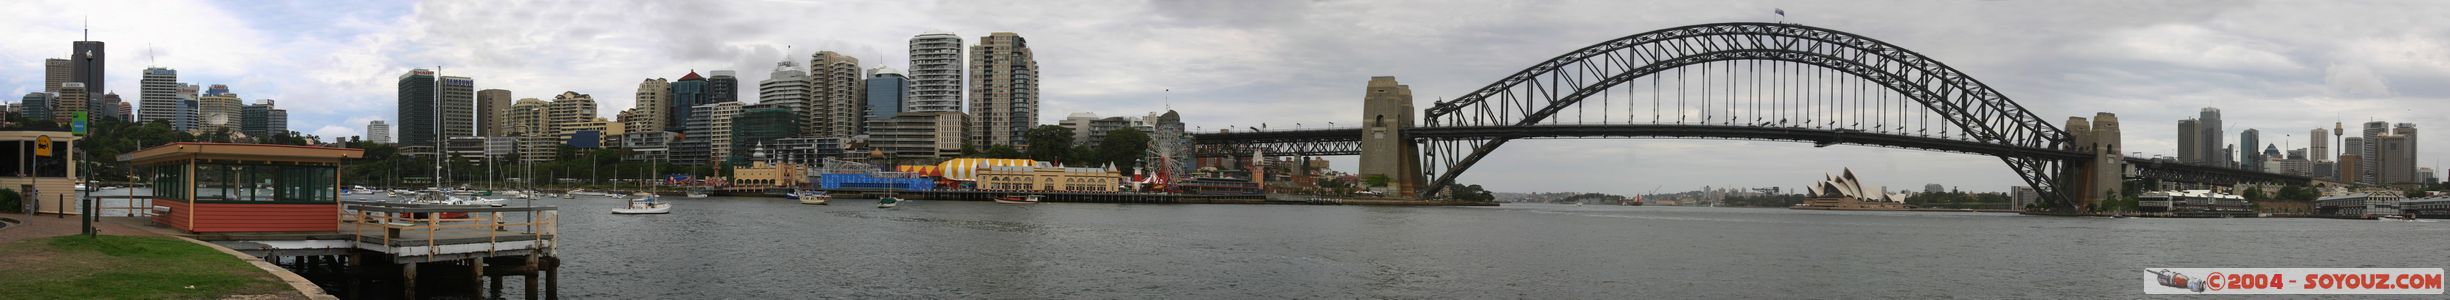 panorama of North Sydney and Harbour Bridge
Mots-clés: panorama